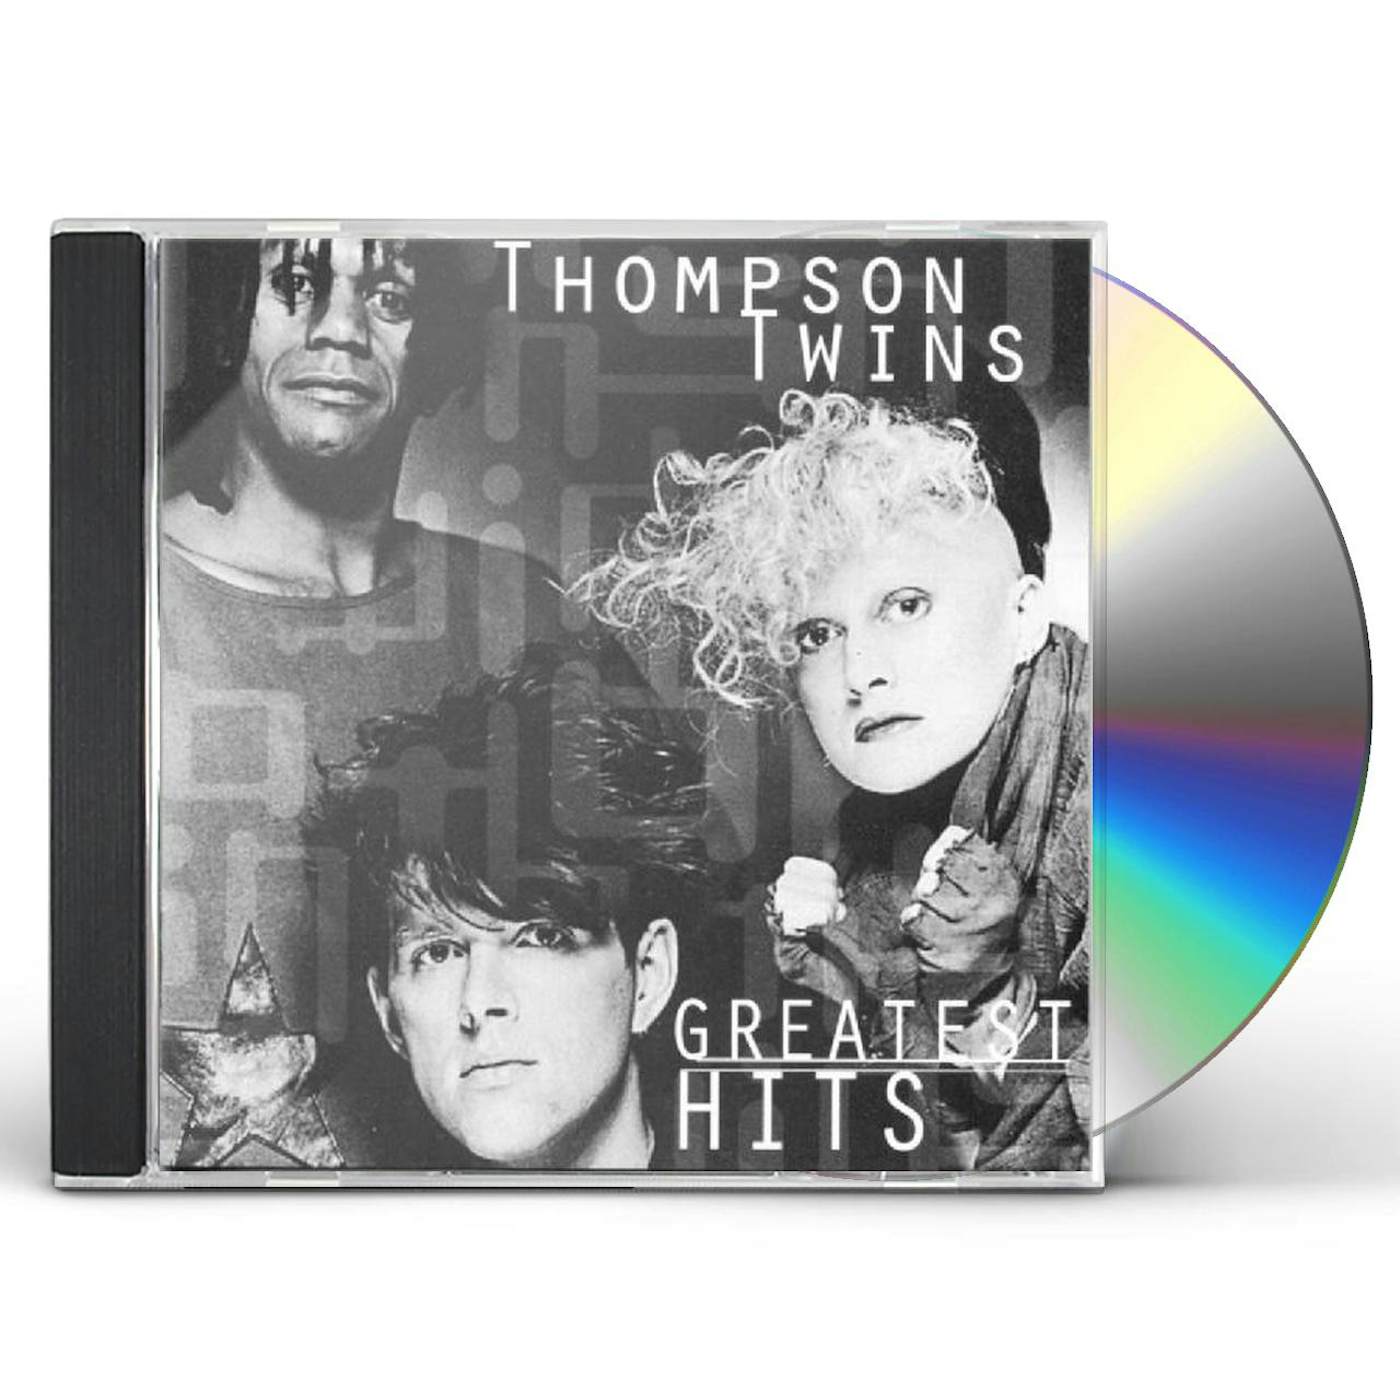 Thompson Twins LOVE LIES & OTHER STRANGE THINGS: GREATEST HITS CD